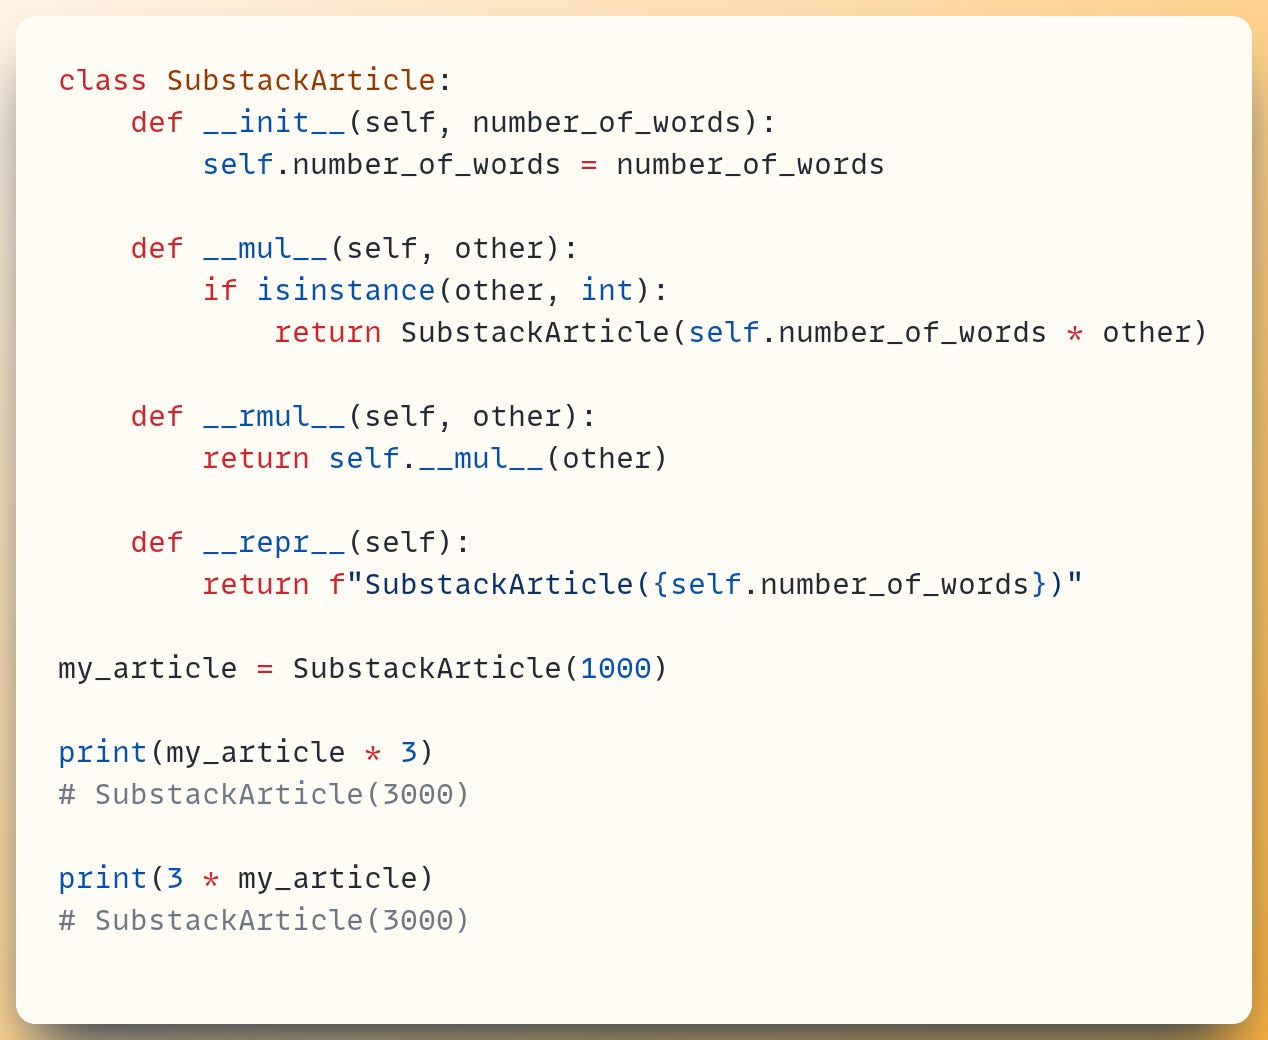 class SubstackArticle:     def __init__(self, number_of_words):         self.number_of_words = number_of_words ​     def __mul__(self, other):         if isinstance(other, int):             return SubstackArticle(self.number_of_words * other) ​     def __rmul__(self, other):         return self.__mul__(other) ​     def __repr__(self):         return f"SubstackArticle({self.number_of_words})" ​ my_article = SubstackArticle(1000) ​ print(my_article * 3) # SubstackArticle(3000) ​ print(3 * my_article) # SubstackArticle(3000)